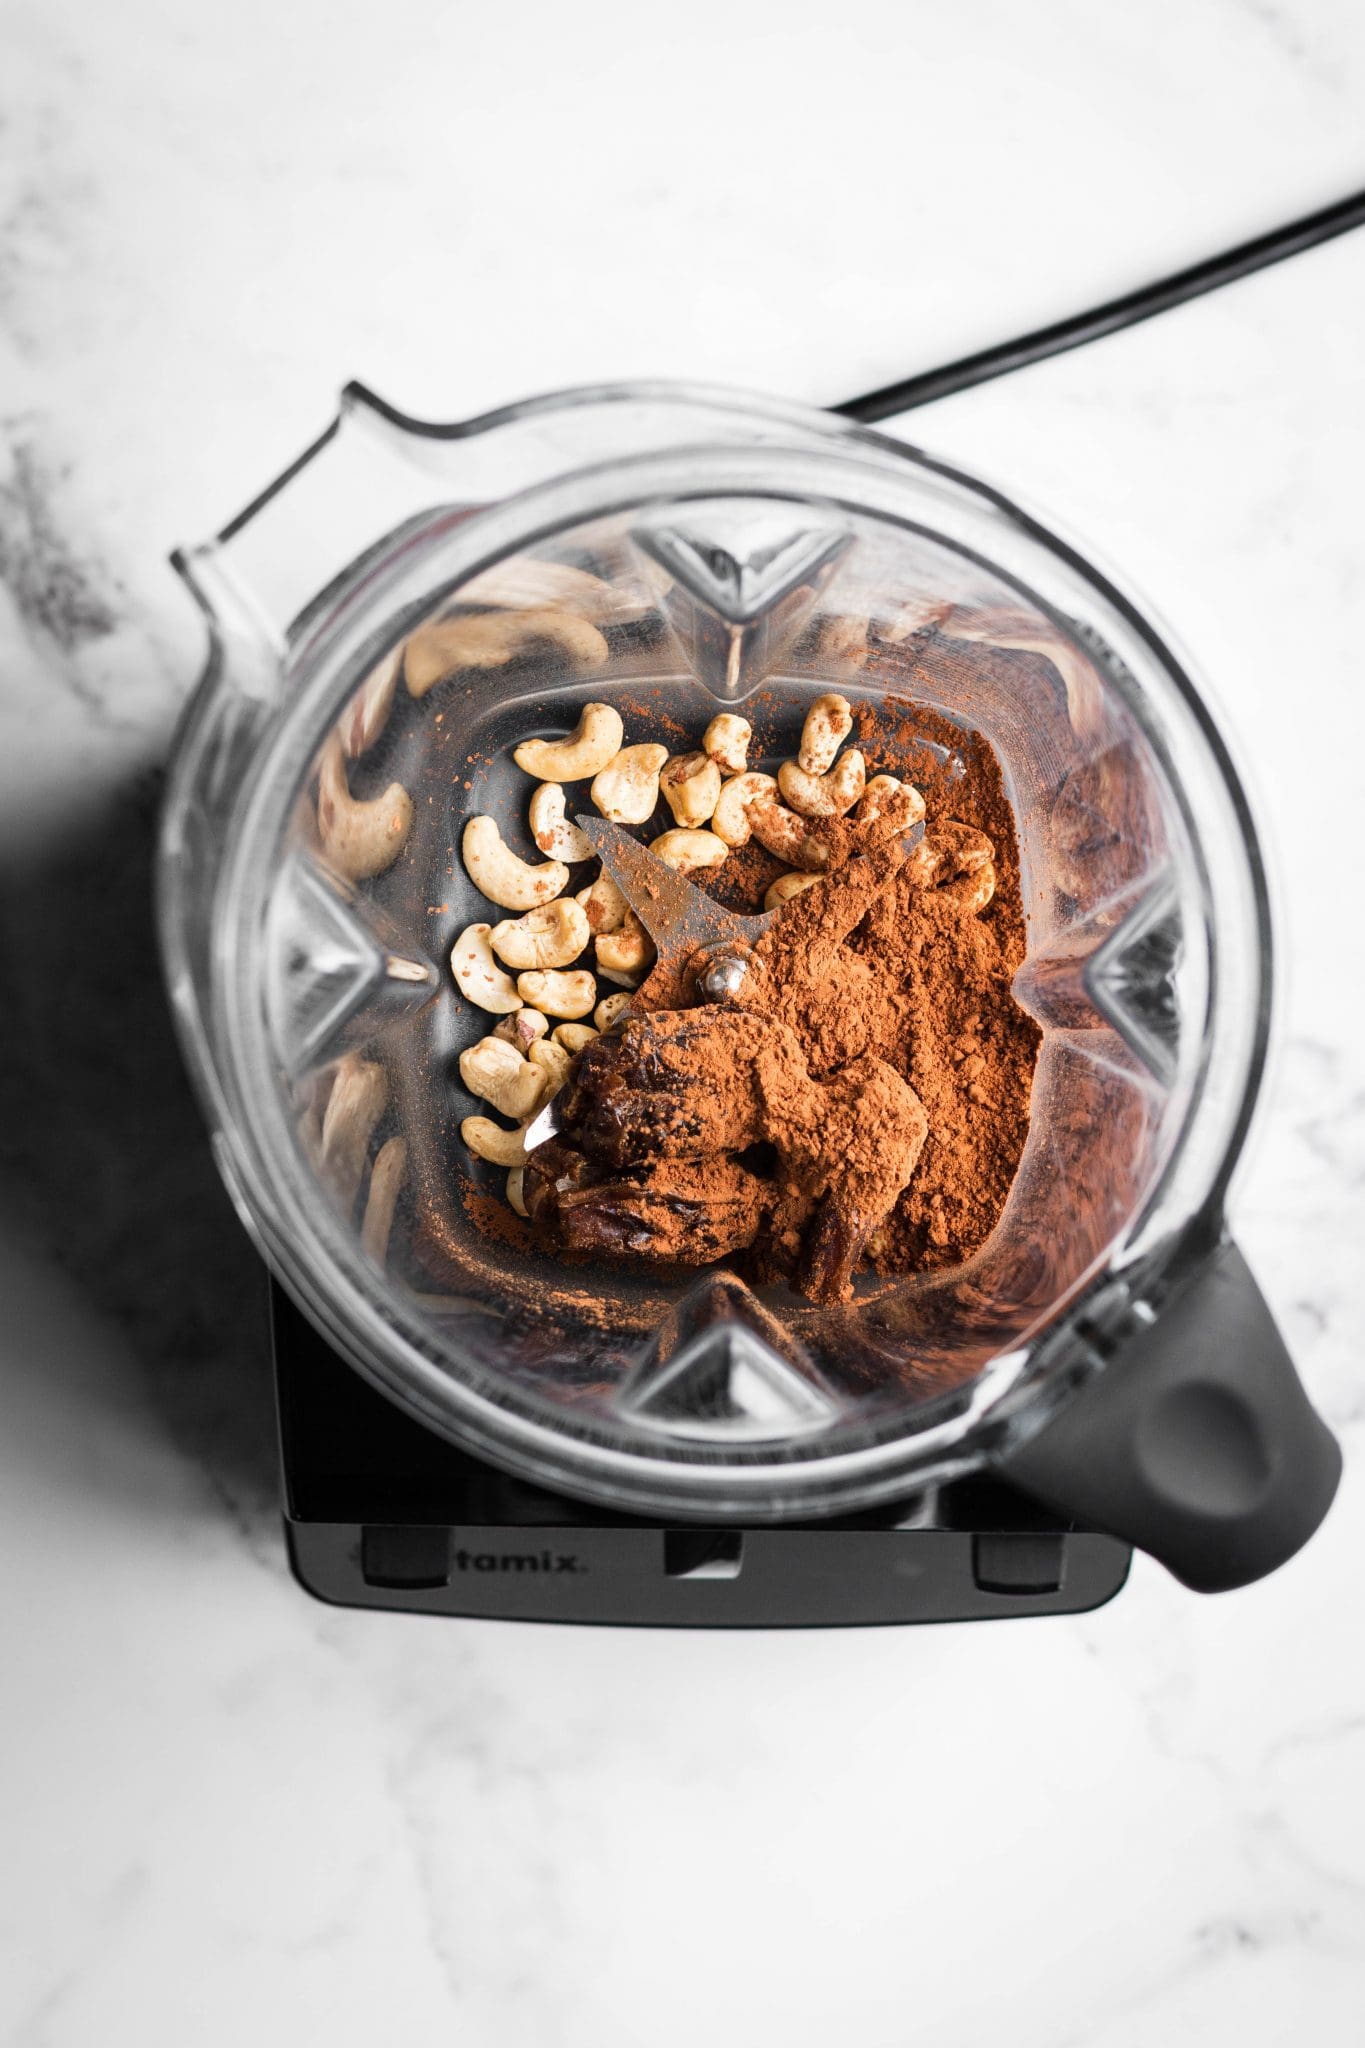 cocoa powder, dates and cashews in a blender